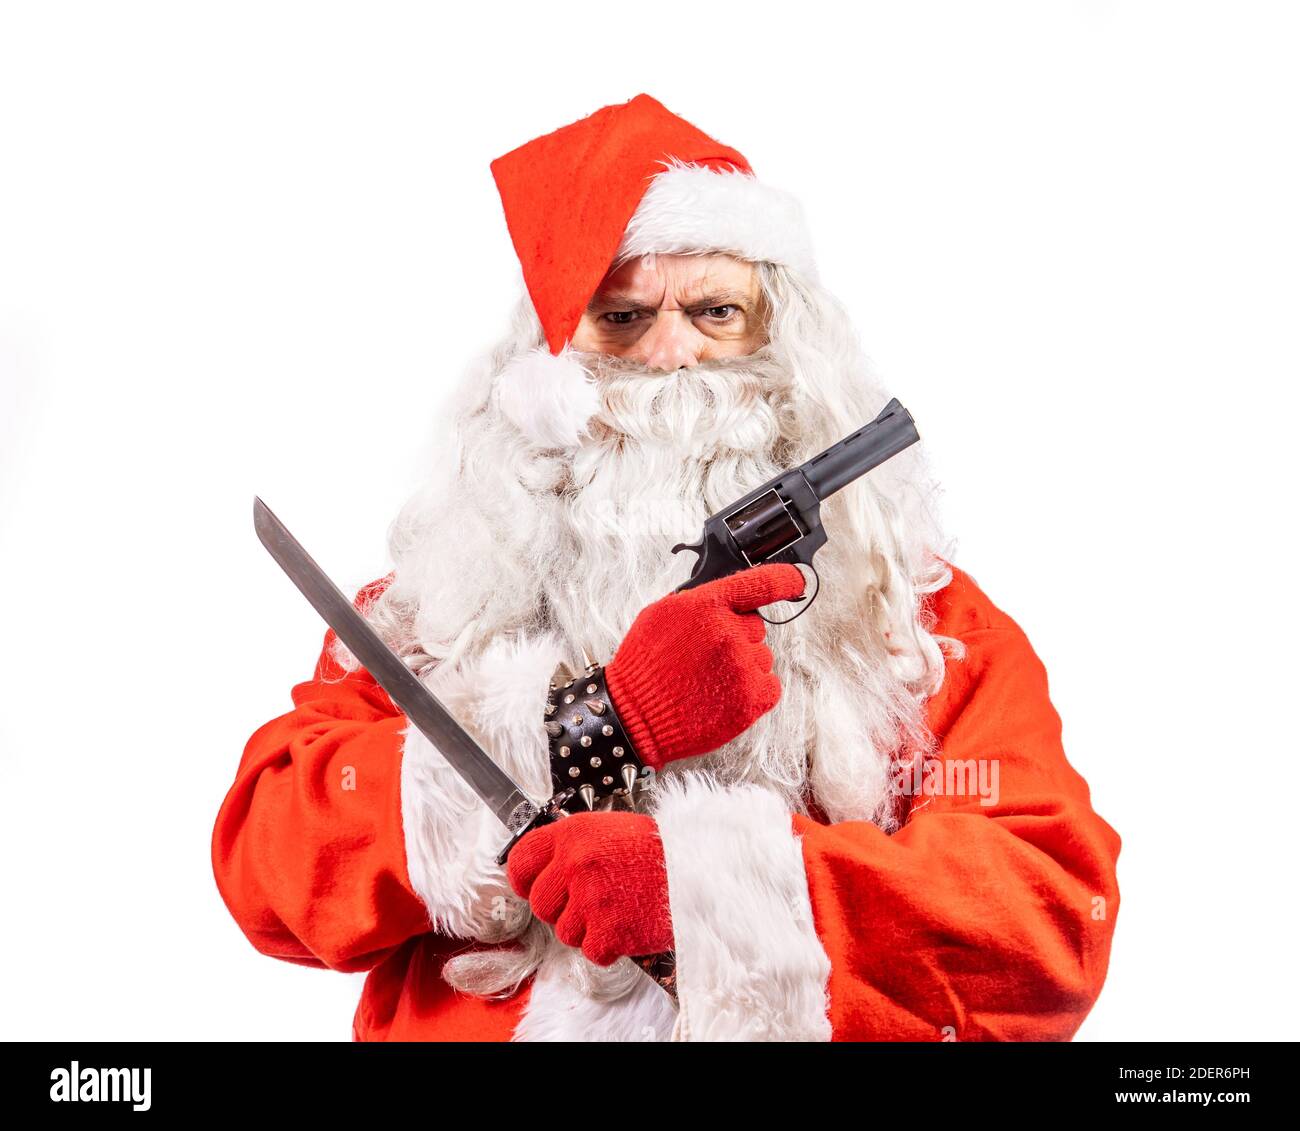 Santa Claus is armed with a gun and a knife, isolated on a white background. Stock Photo